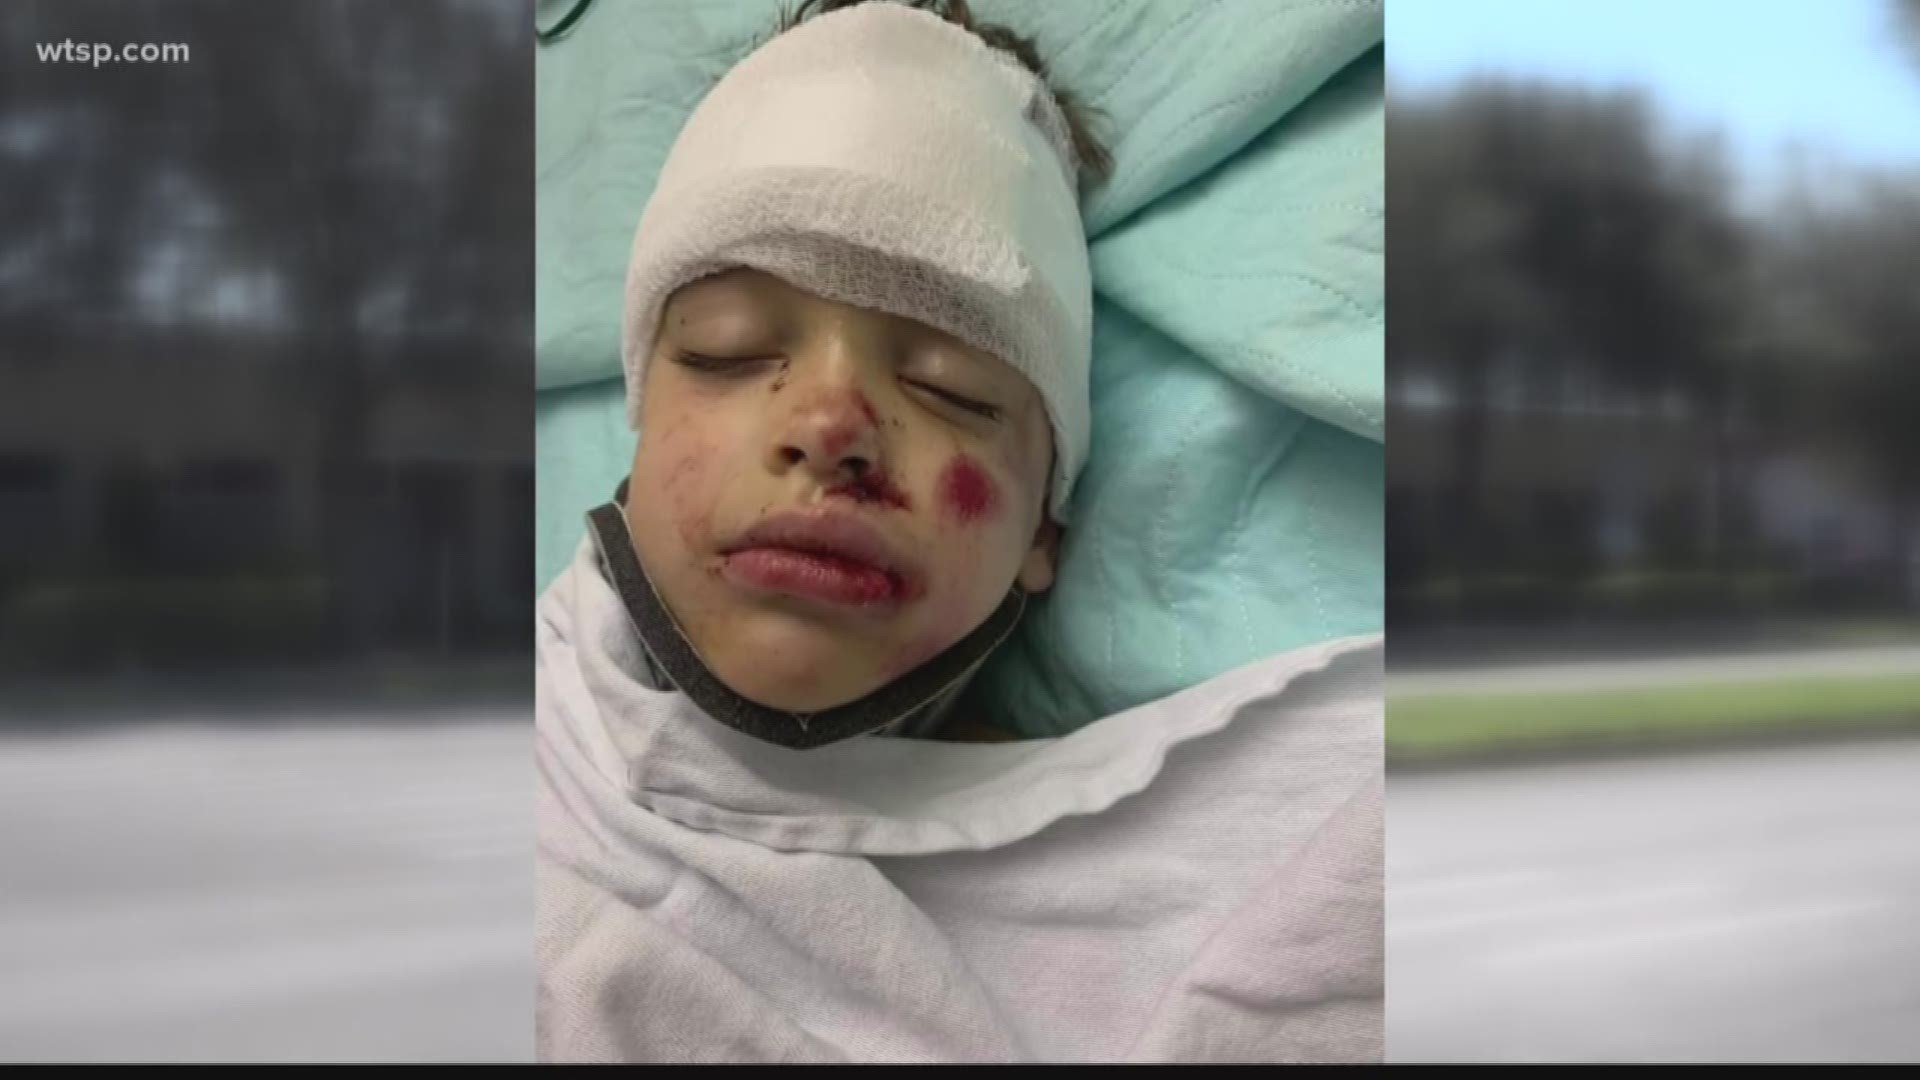 When a little boy was hit by a car trick-or-treating, a local business owner jumped to help. Now, he's raising money for change. https://bit.ly/2N8uHCY